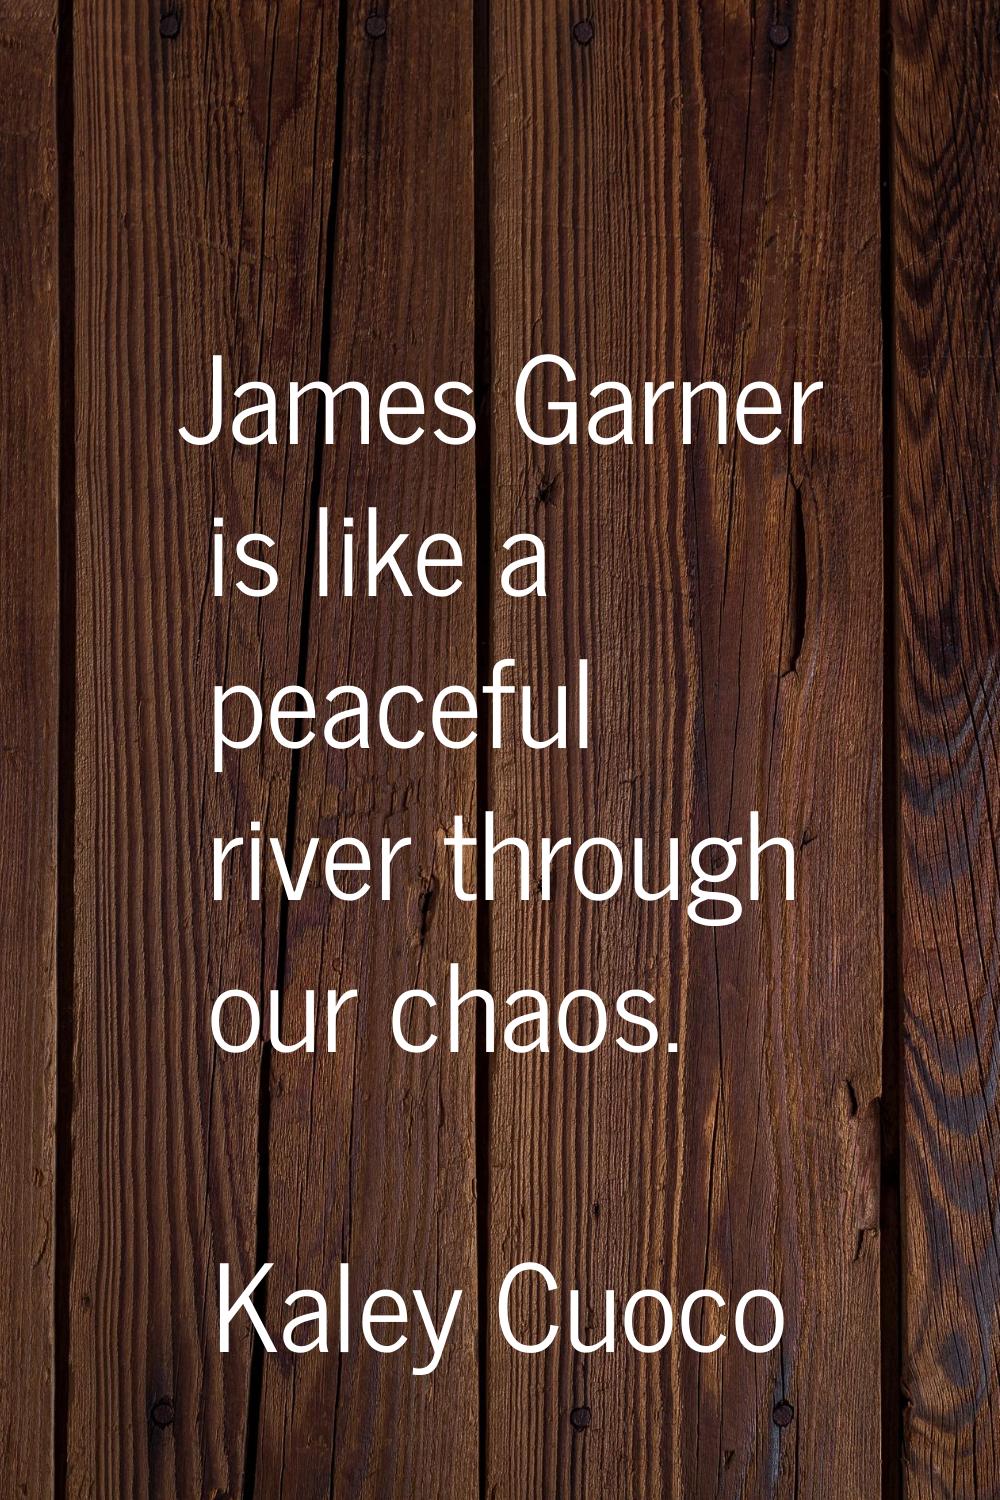 James Garner is like a peaceful river through our chaos.